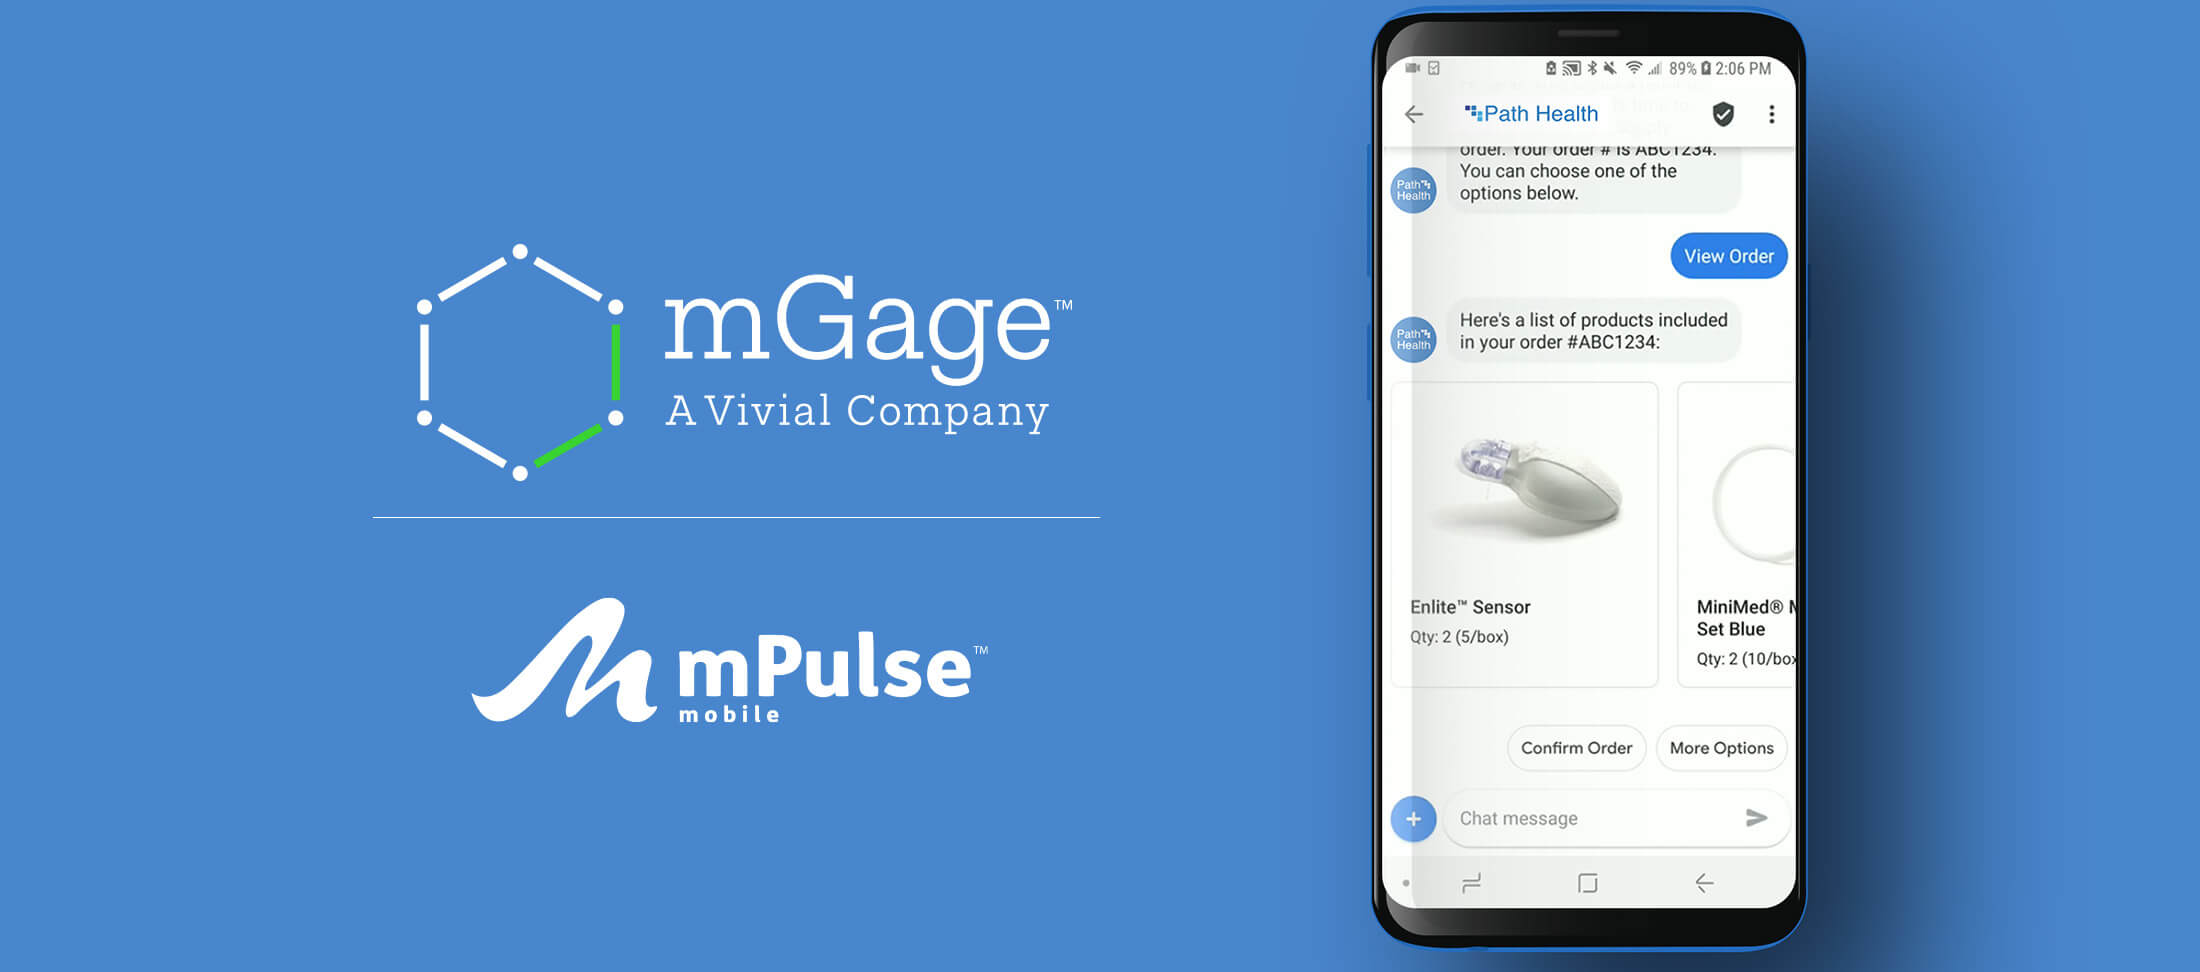 mGage and mPulse Mobile Partner to Improve Consumer Engagement in Healthcare through RCS Messaging